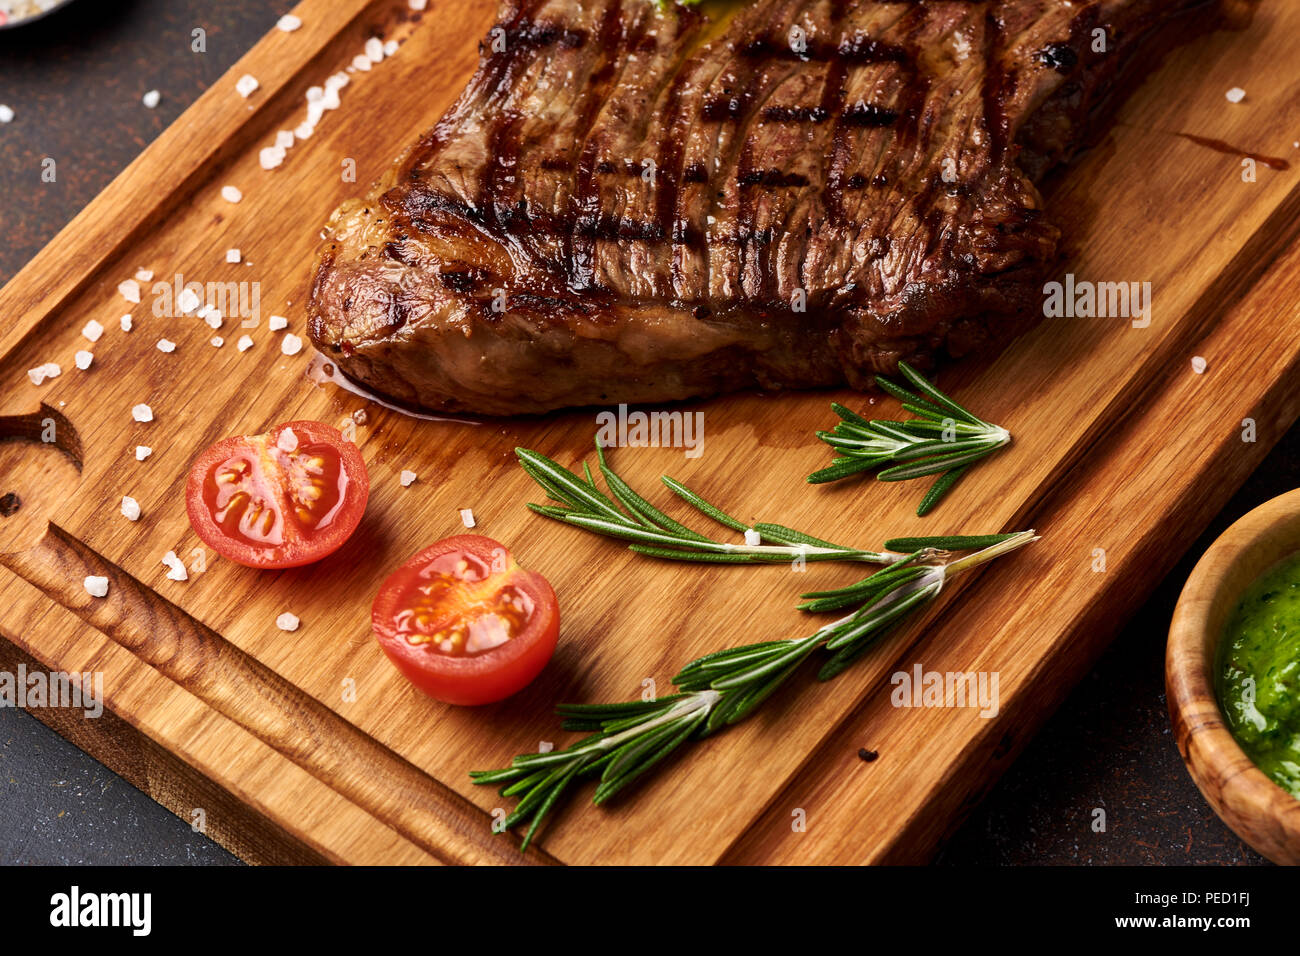 Grilled Black Angus Steak with tomatoes, garlic with rosemary on meat cutting board. Stock Photo